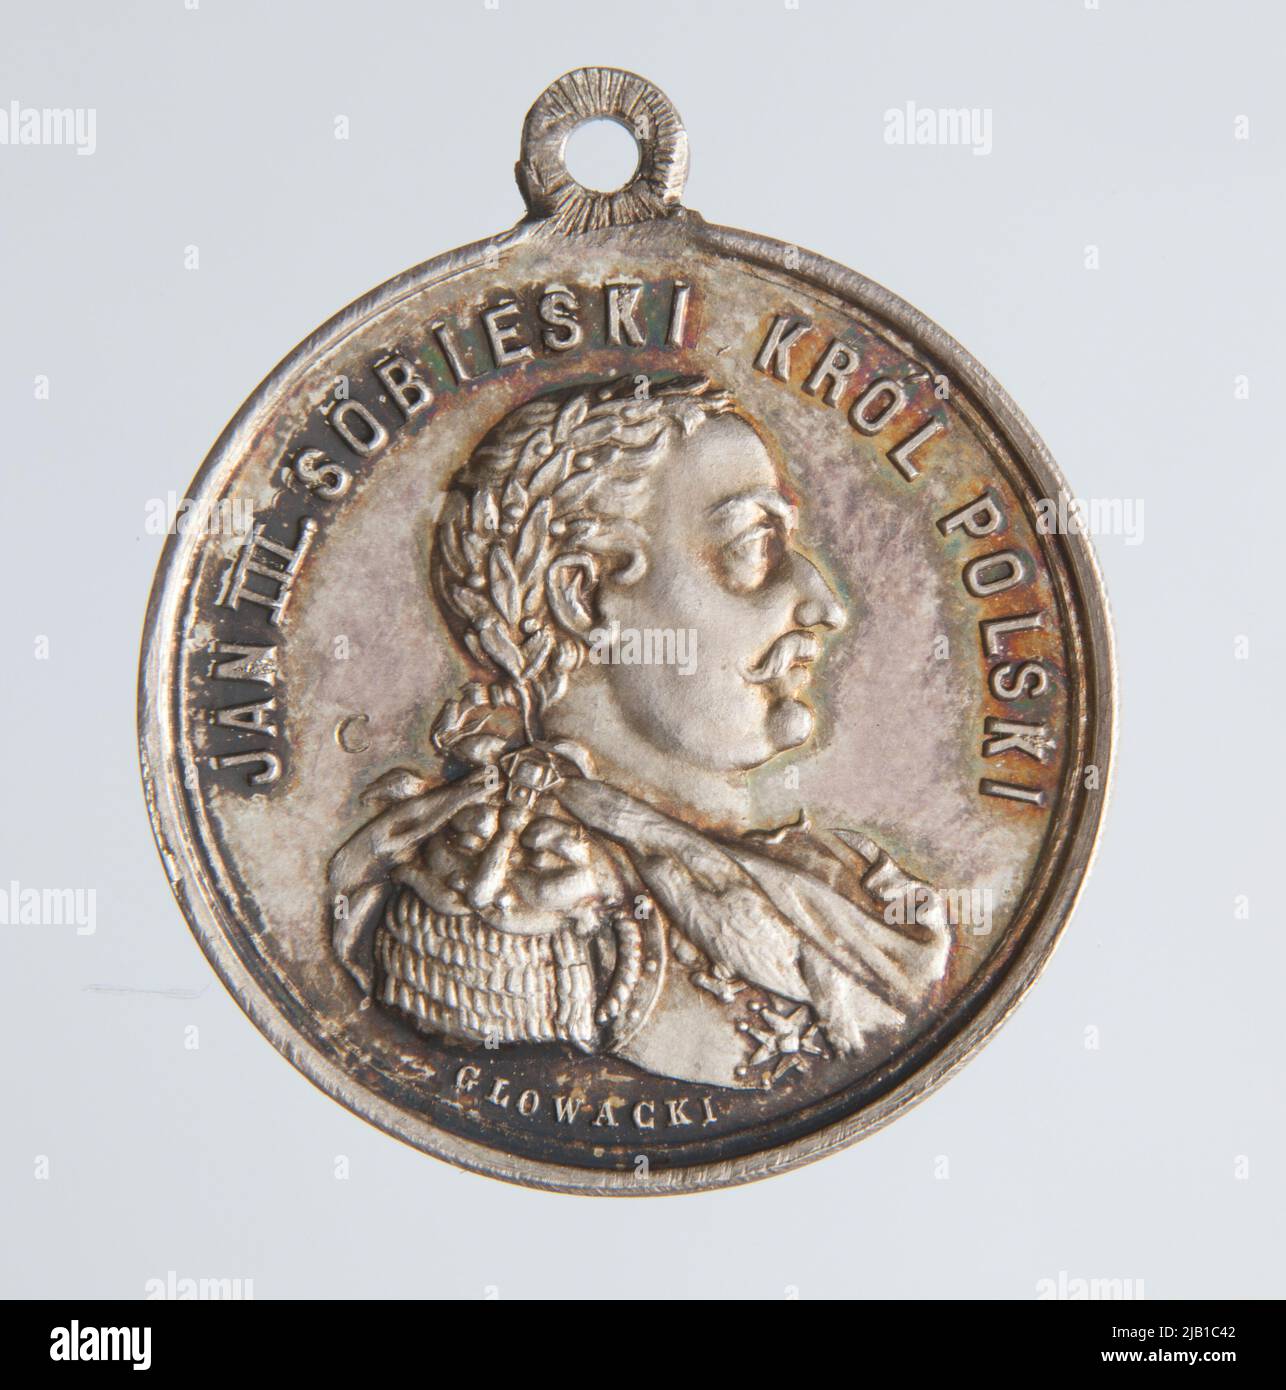 A medal commemorating the 200th anniversary of the Vienna relief G Owacki, Wac Aw (1828 1908) Stock Photo